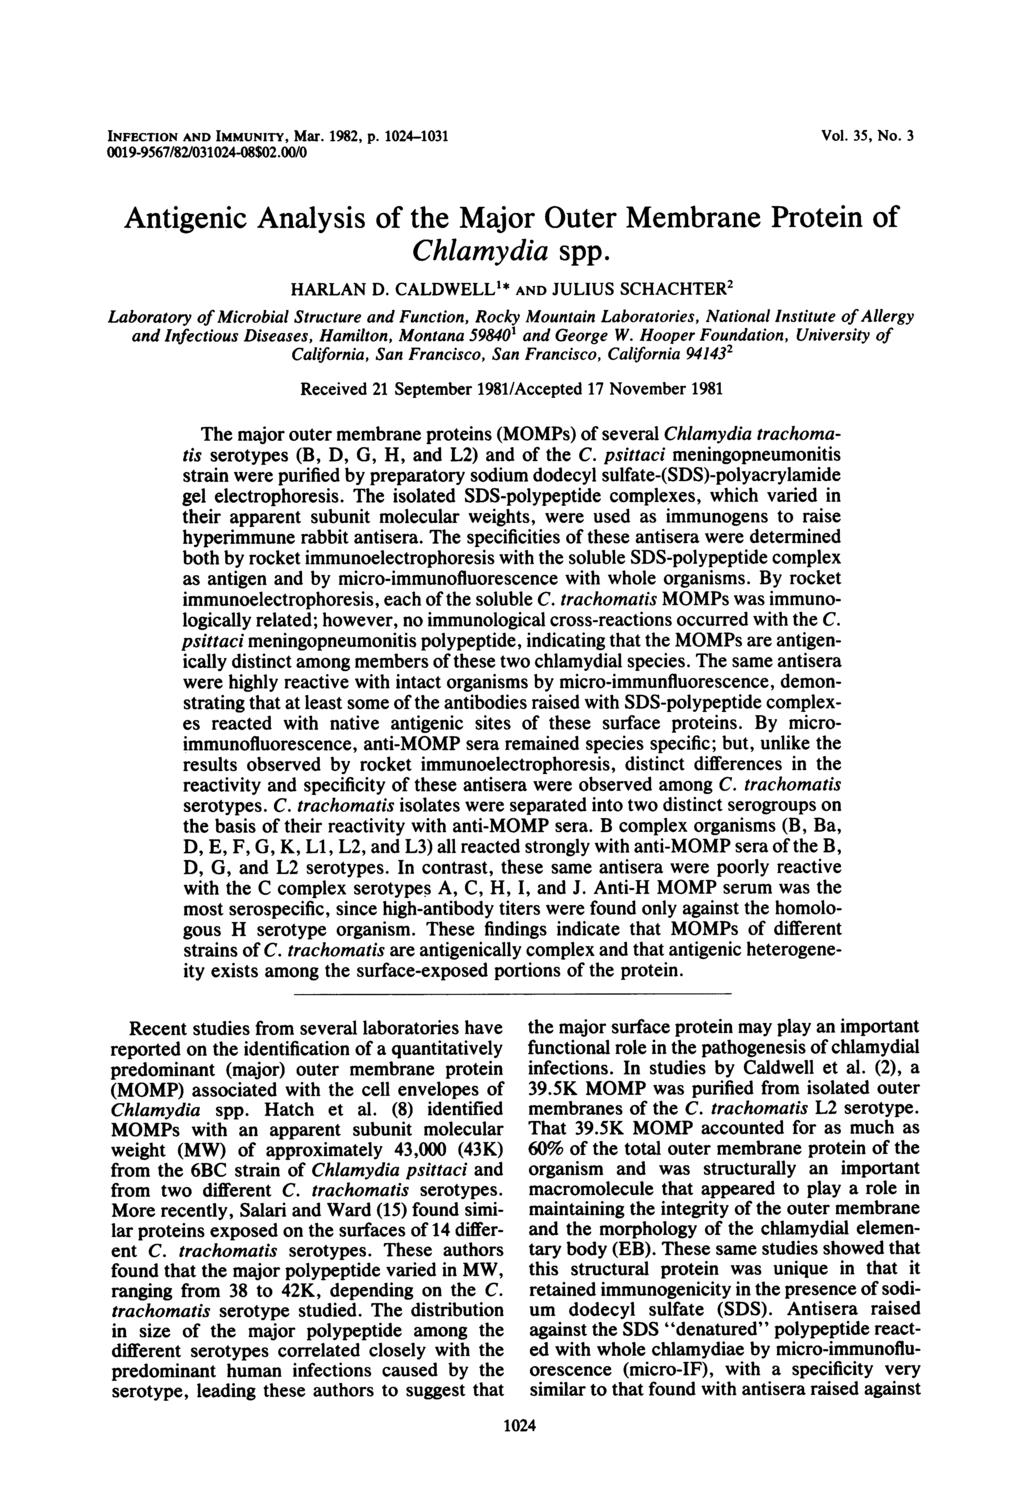 INFECTION AND IMMUNITY, Mar. 1982, p. 1024-1031 Vol. 35, No. 3 0019-9567/82/031024-08$02.00/0 Antigenic Analysis of the Major Outer Membrane Protein of Chlamydia spp. HARLAN D.